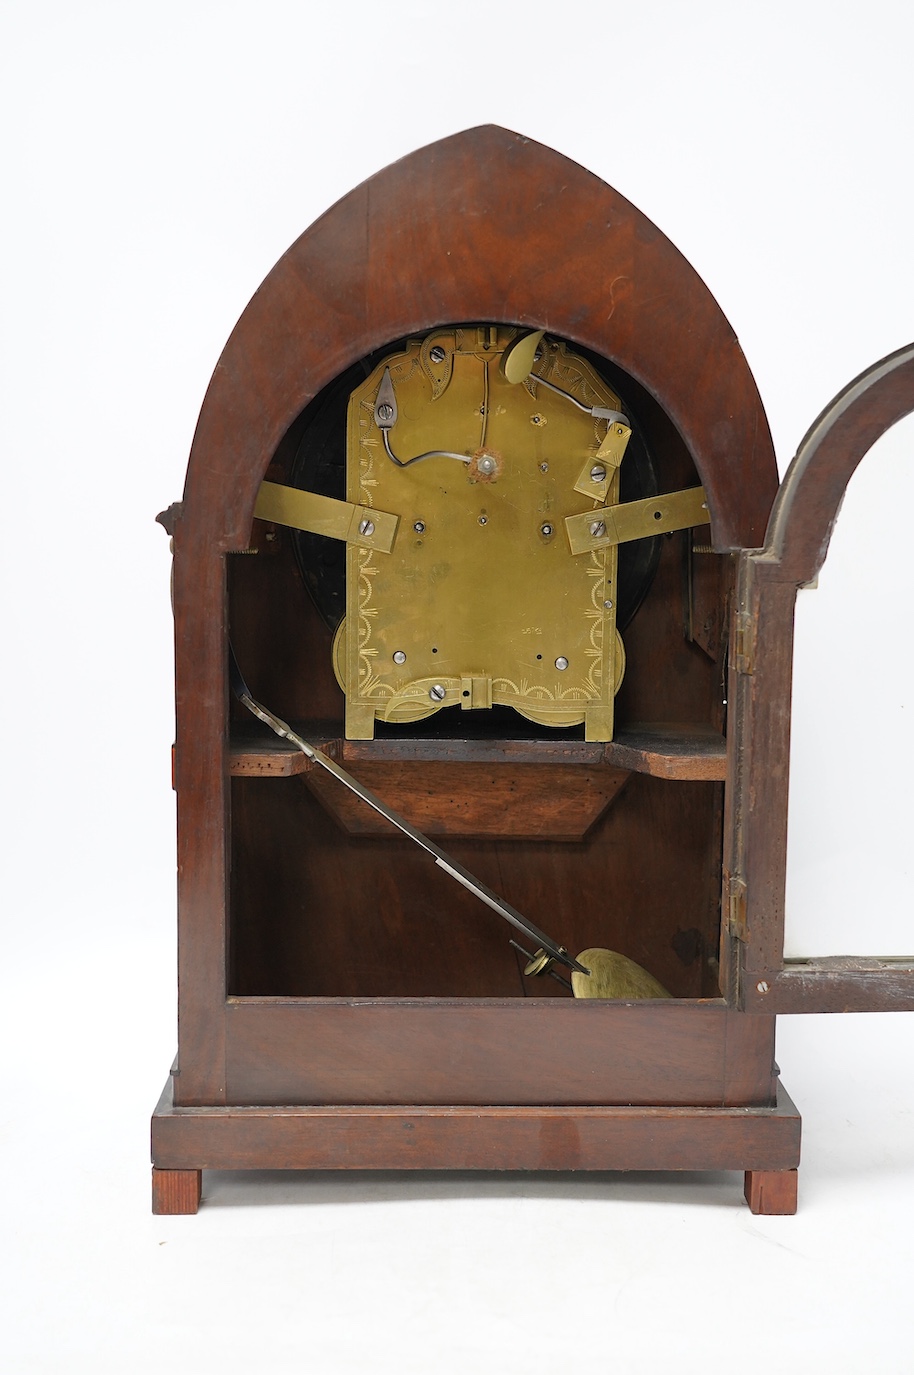 An early 19th century brass inlaid mahogany lancet shaped mantel clock by G. Willson of London, with pendulum and door-key, no winding key, 45cm. Condition - fair to good, not tested as working